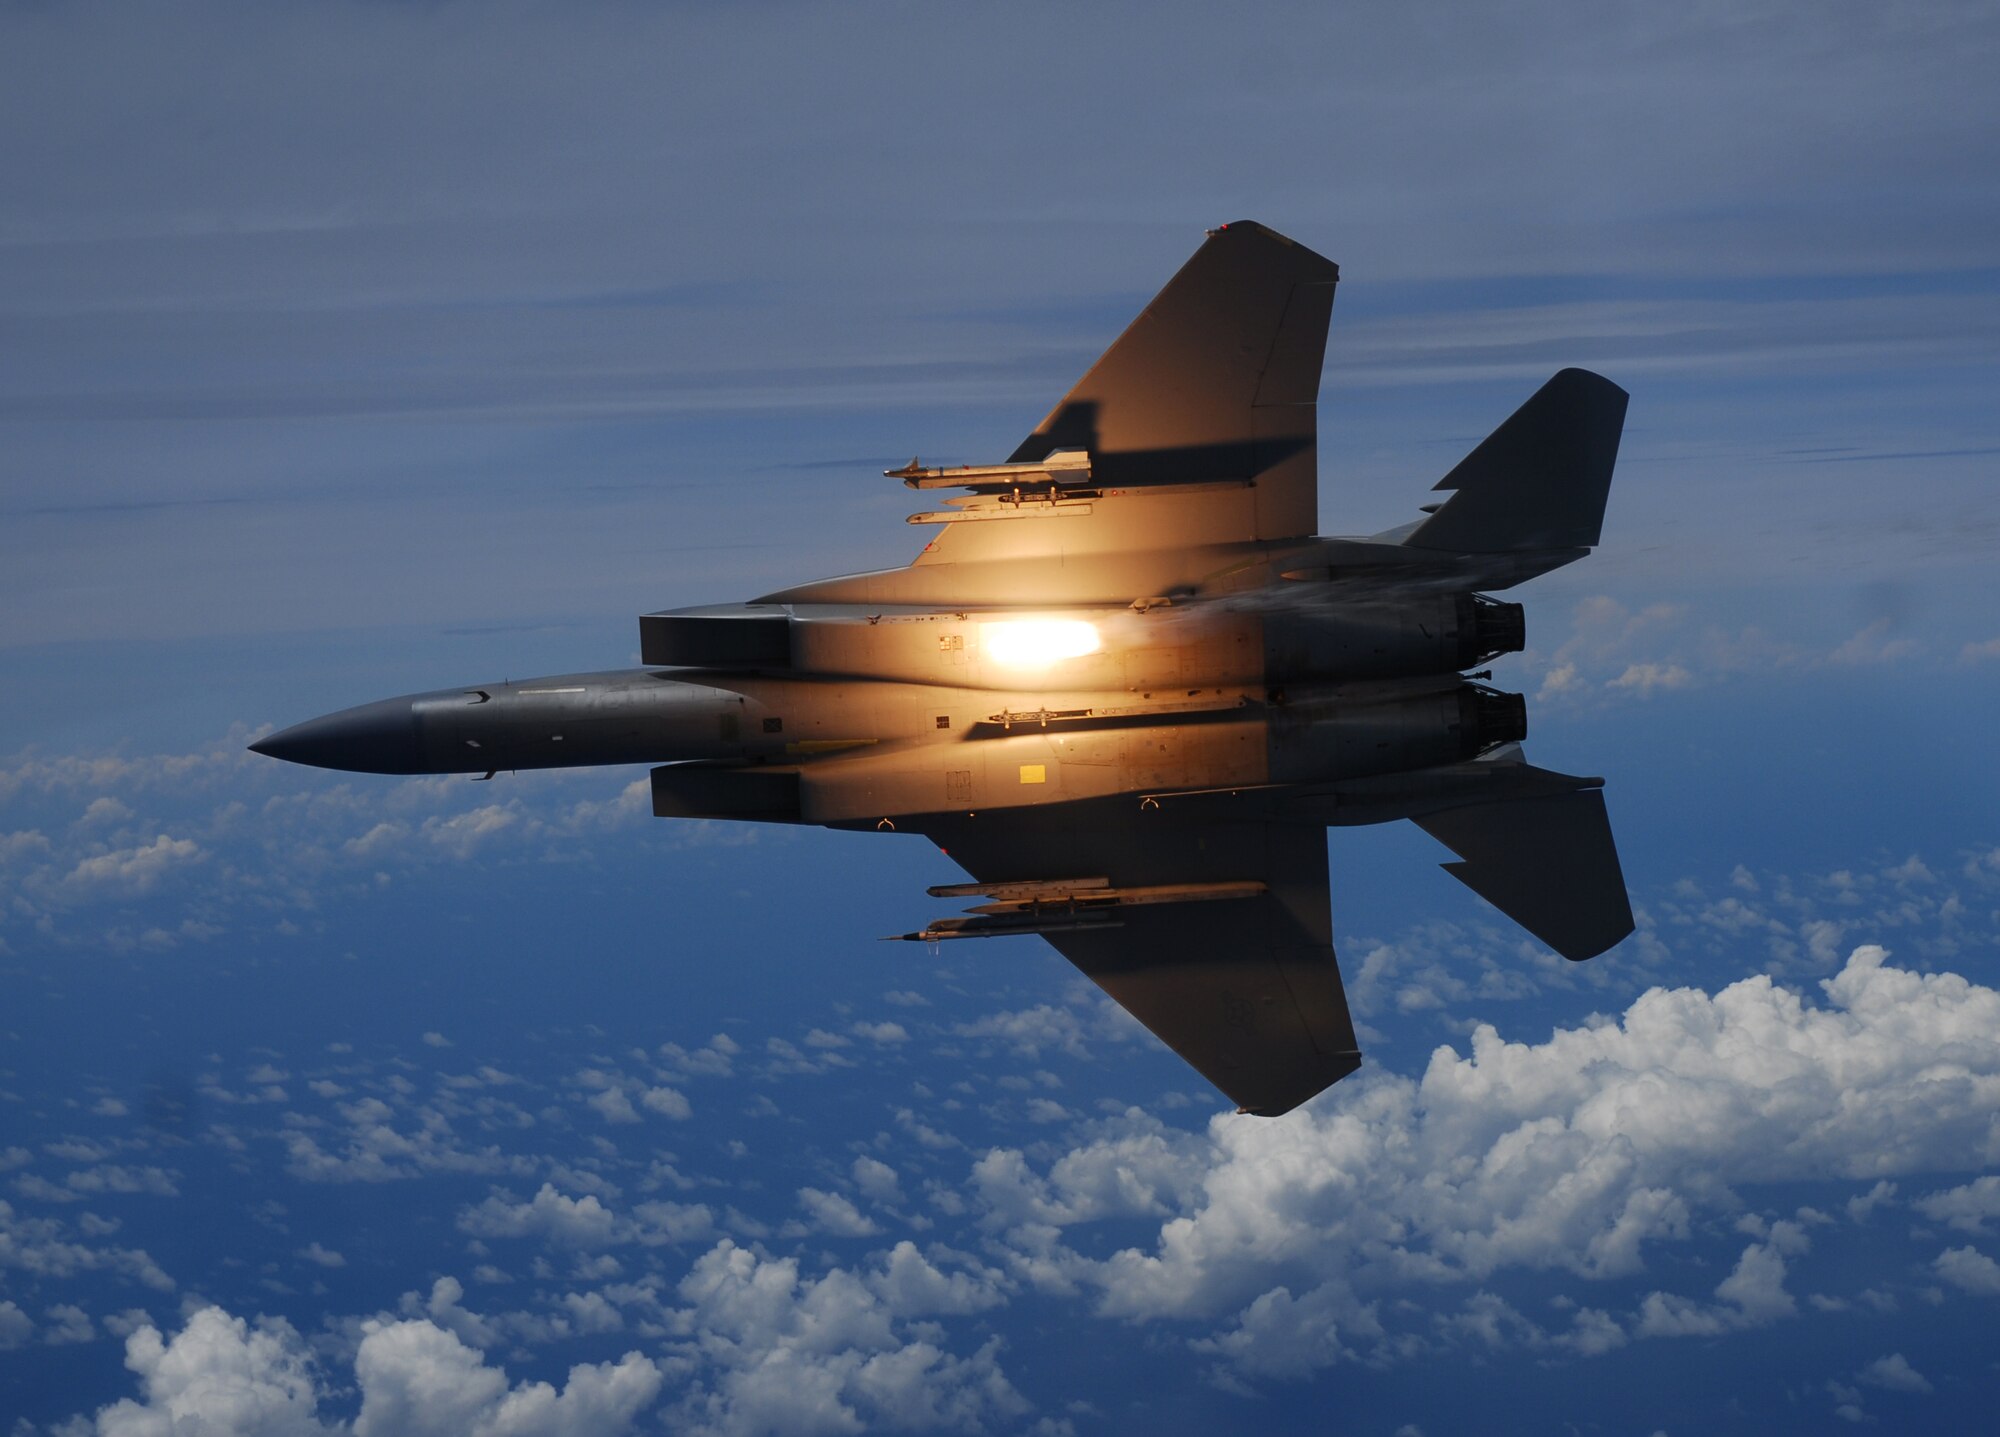 An F-15C Eagle from the 44th Fighter Squadron, Kadena Air Base, releases a flare over the island of Okinawa, Japan July 22, 2009. The mission took place during a total solar eclipse, a rare opportunity for service members stationed here to witness this unique event. (U.S. Air Force photo/Airman 1st Class Chad Warren)